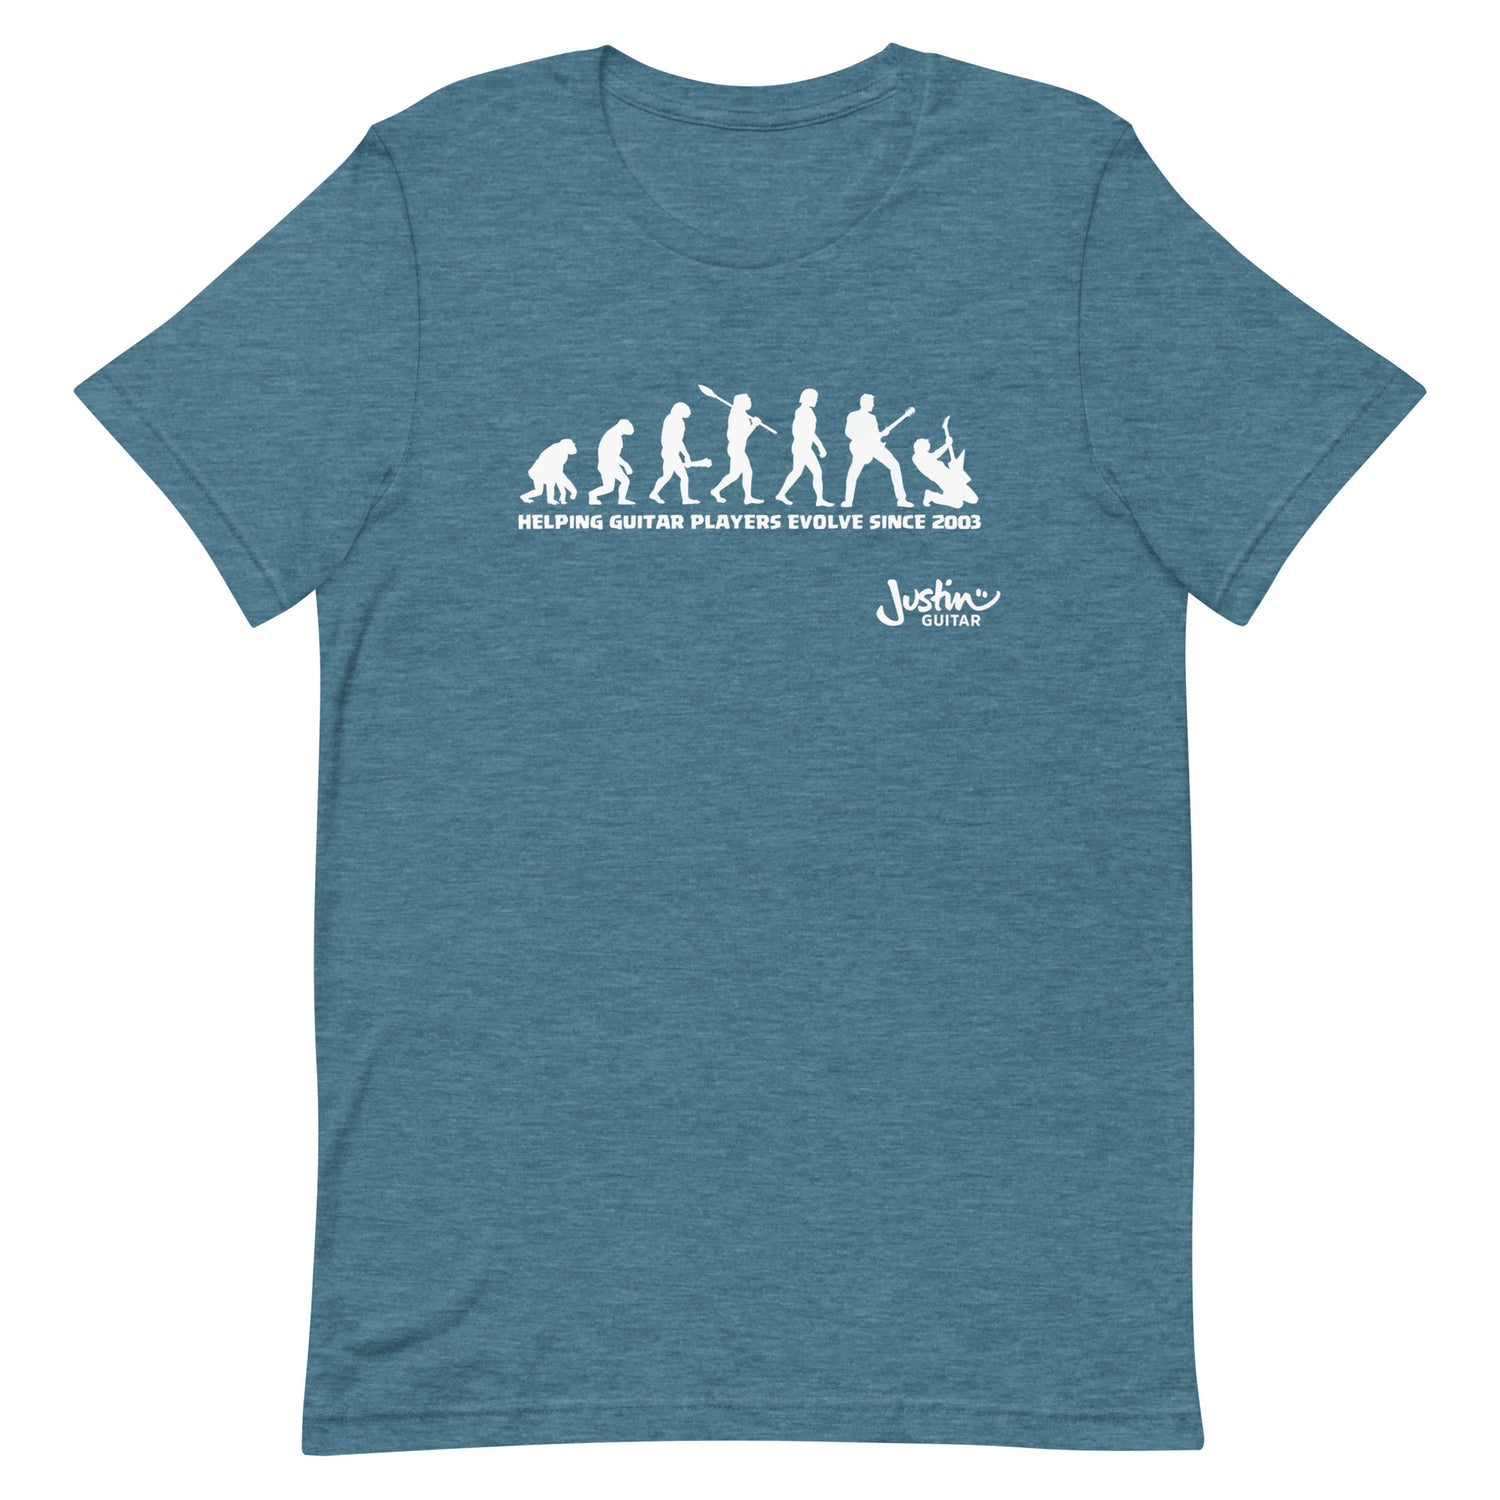 Deep teal Tshirt with funny design of evolving guitar players through time. 